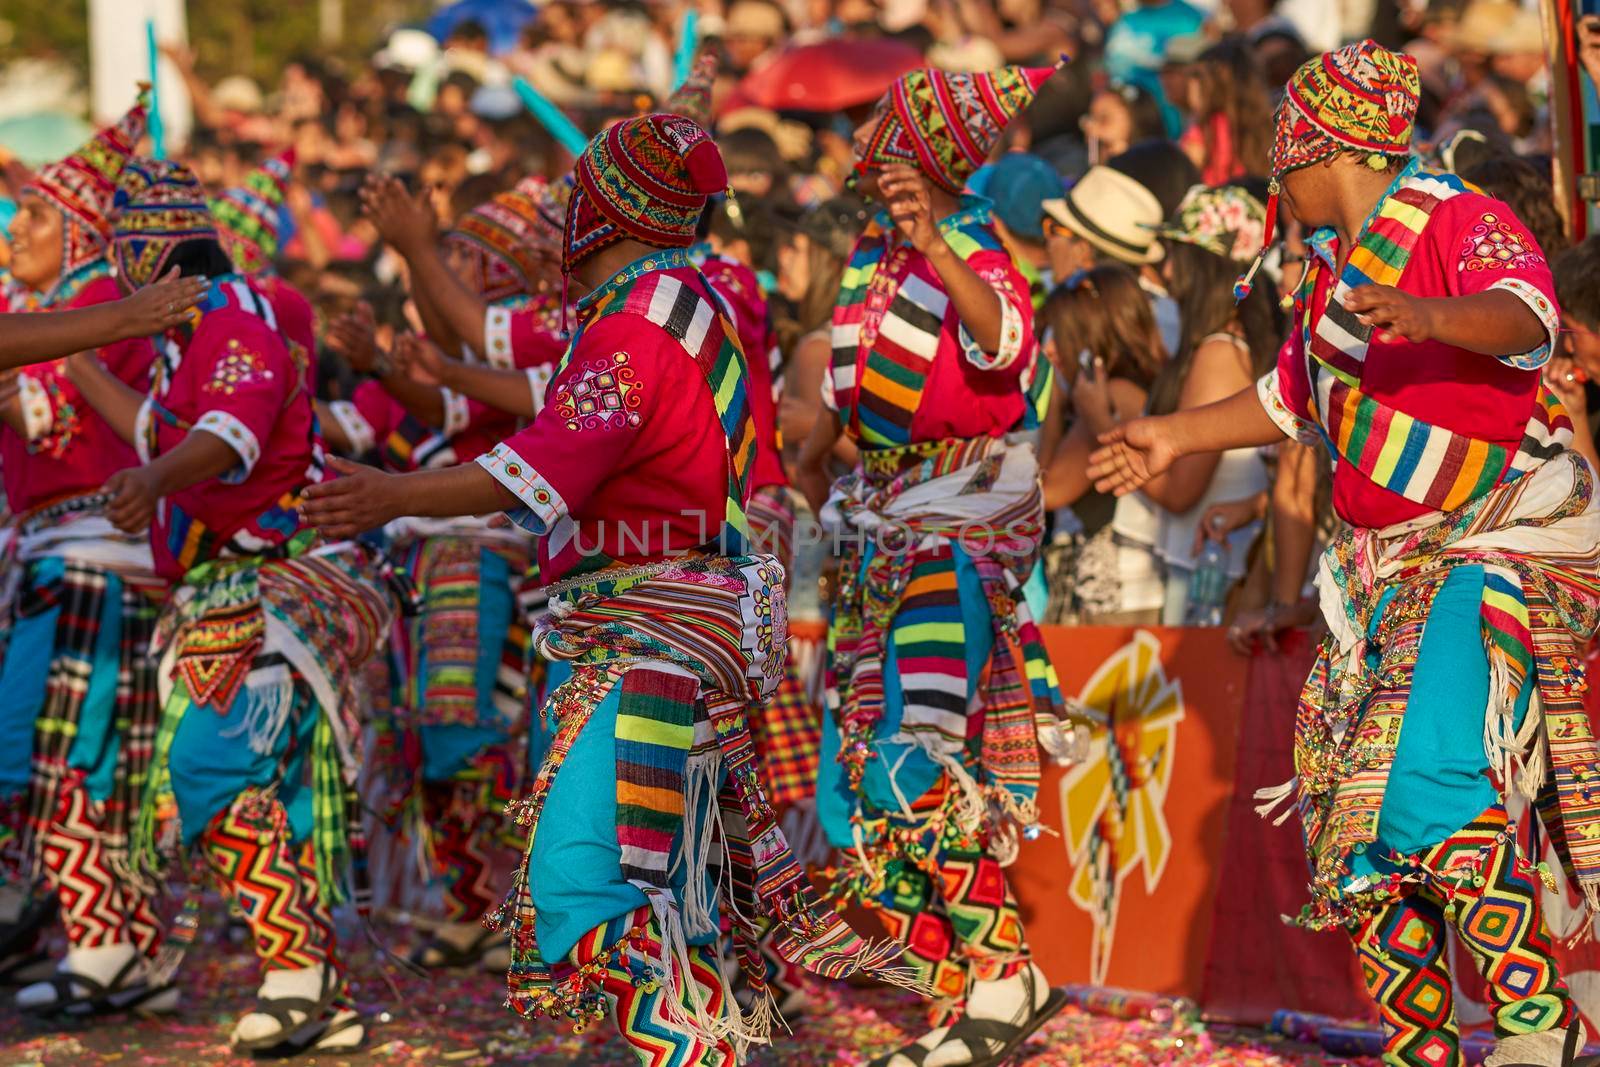 Arica, Chile - January 23, 2016: Tinkus dancing group in colourful costumes performing a traditional ritual dance as part of the Carnaval Andino con la Fuerza del Sol in Arica, Chile.